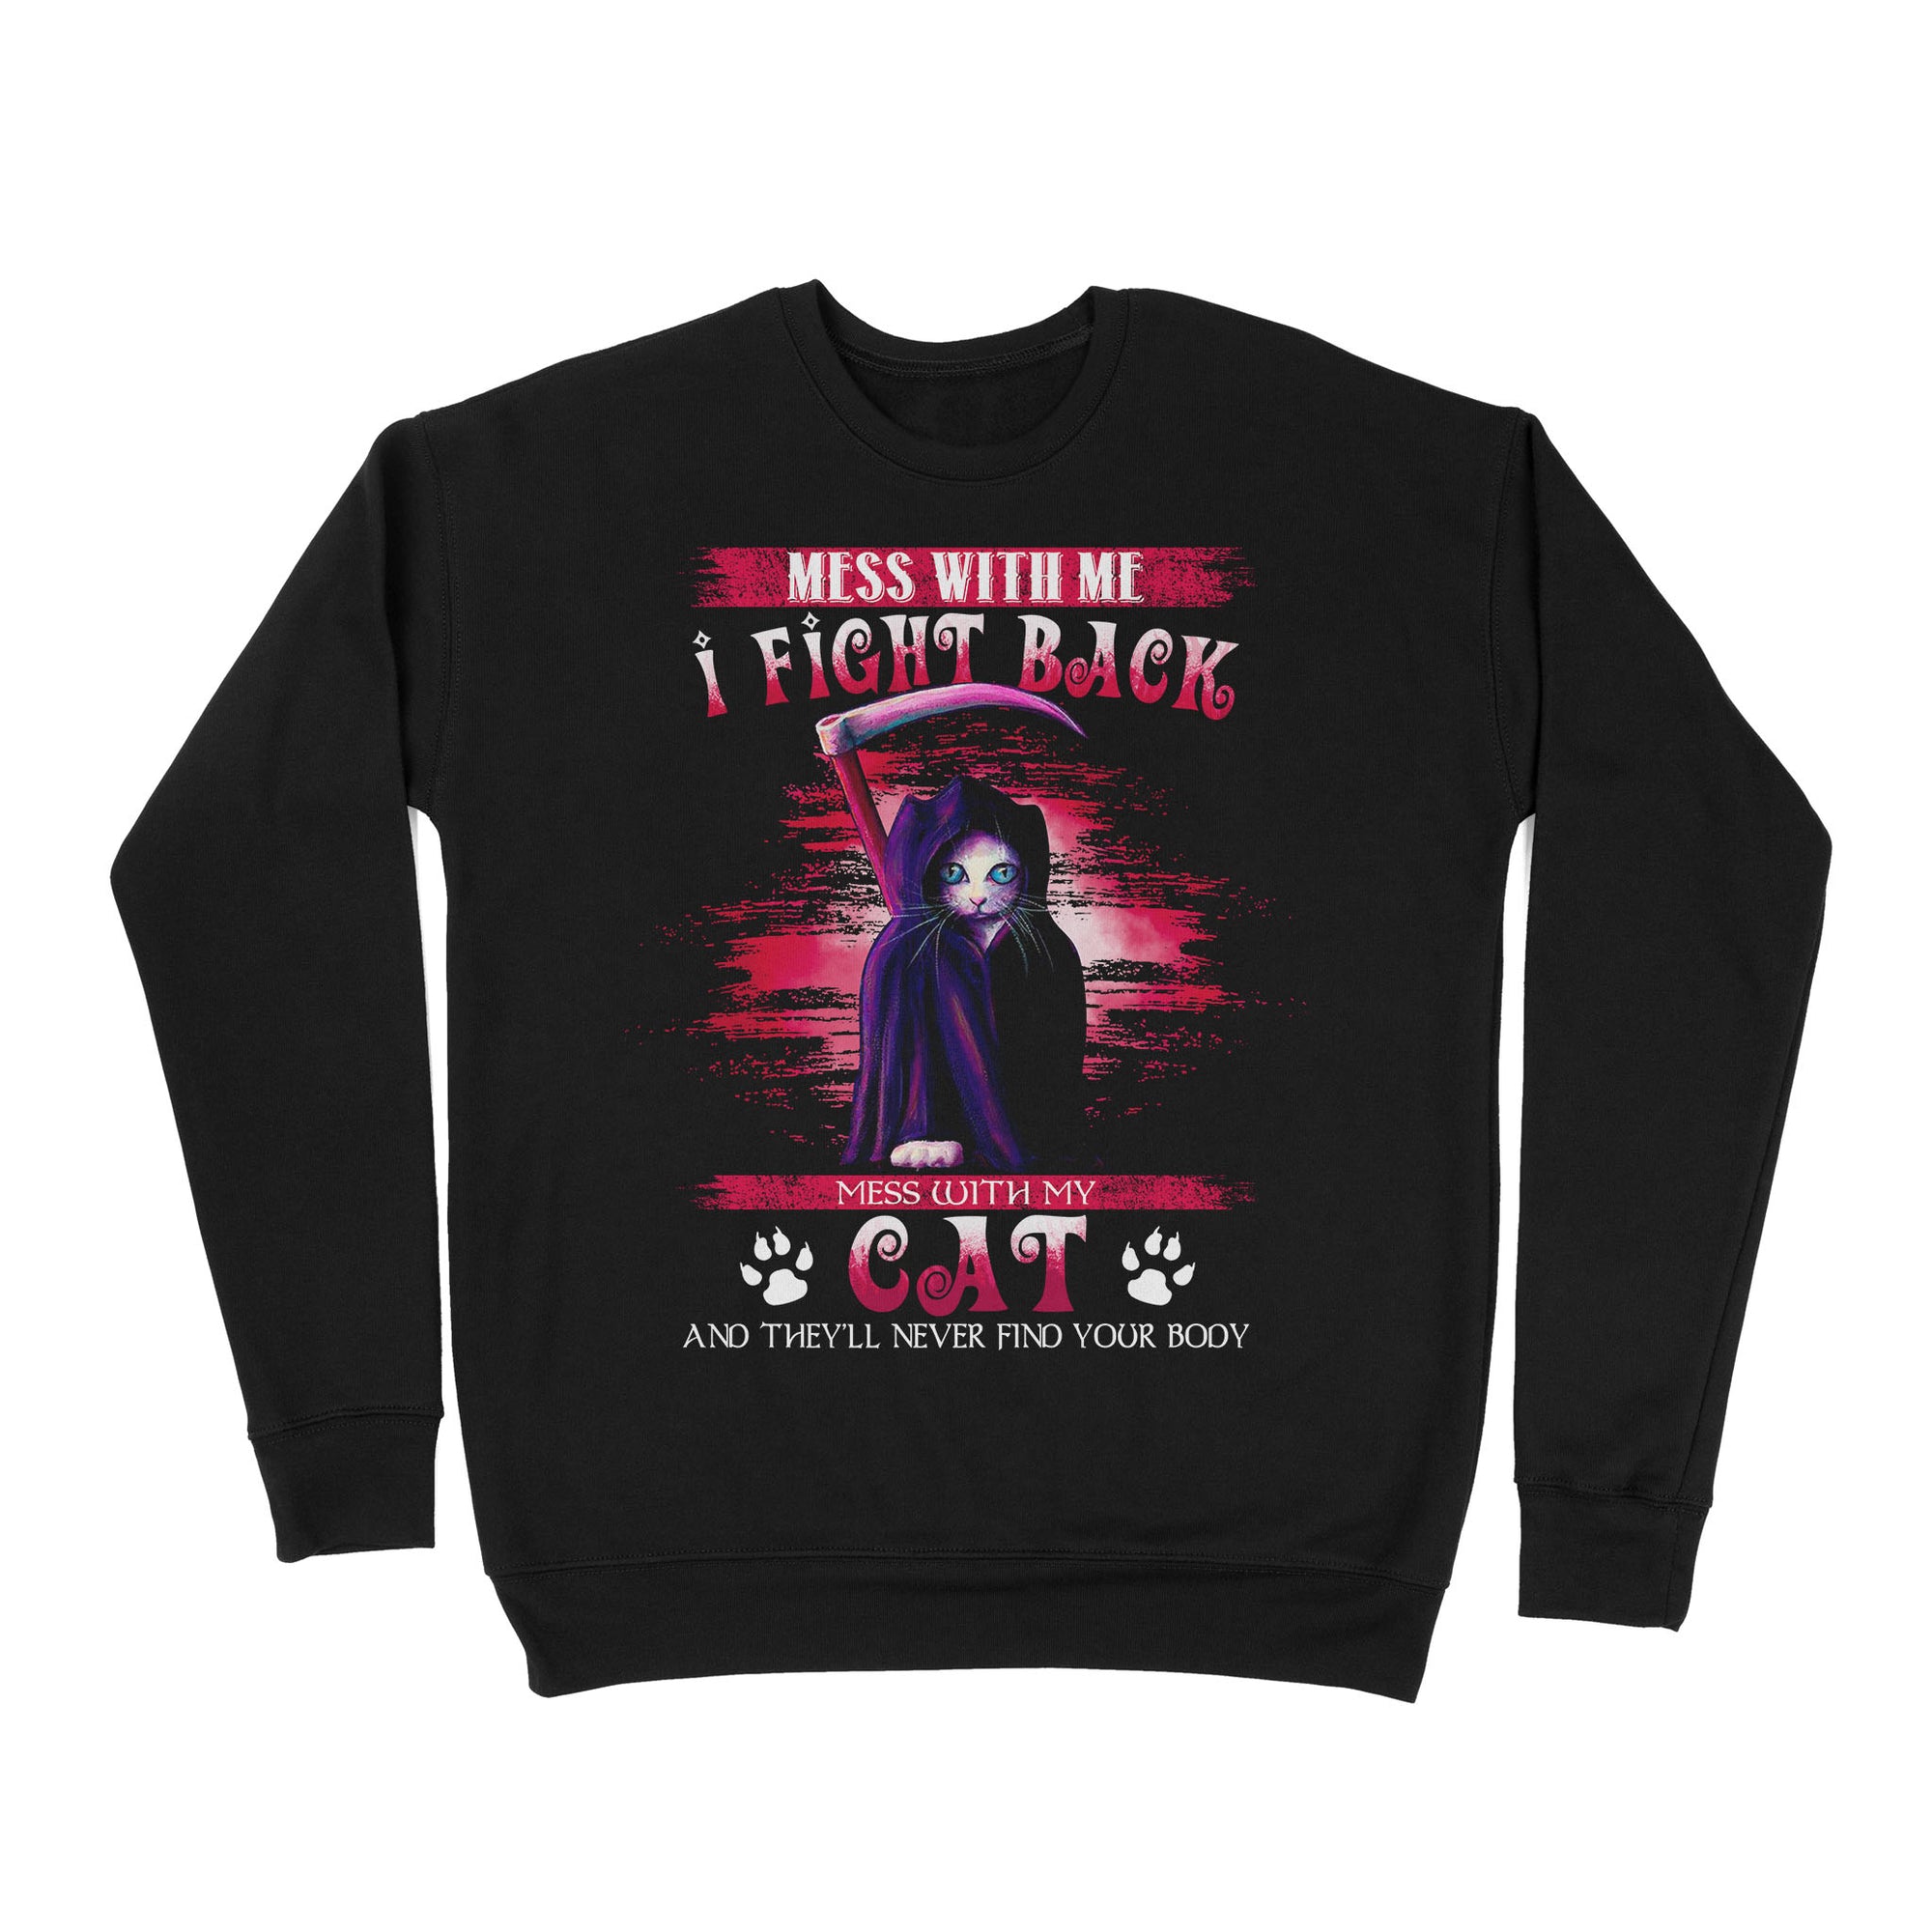 Premium Crew Neck Sweatshirt - Cat Mess With Me I Fight Back Mess With My Cat And They’ll Never Find Your Body